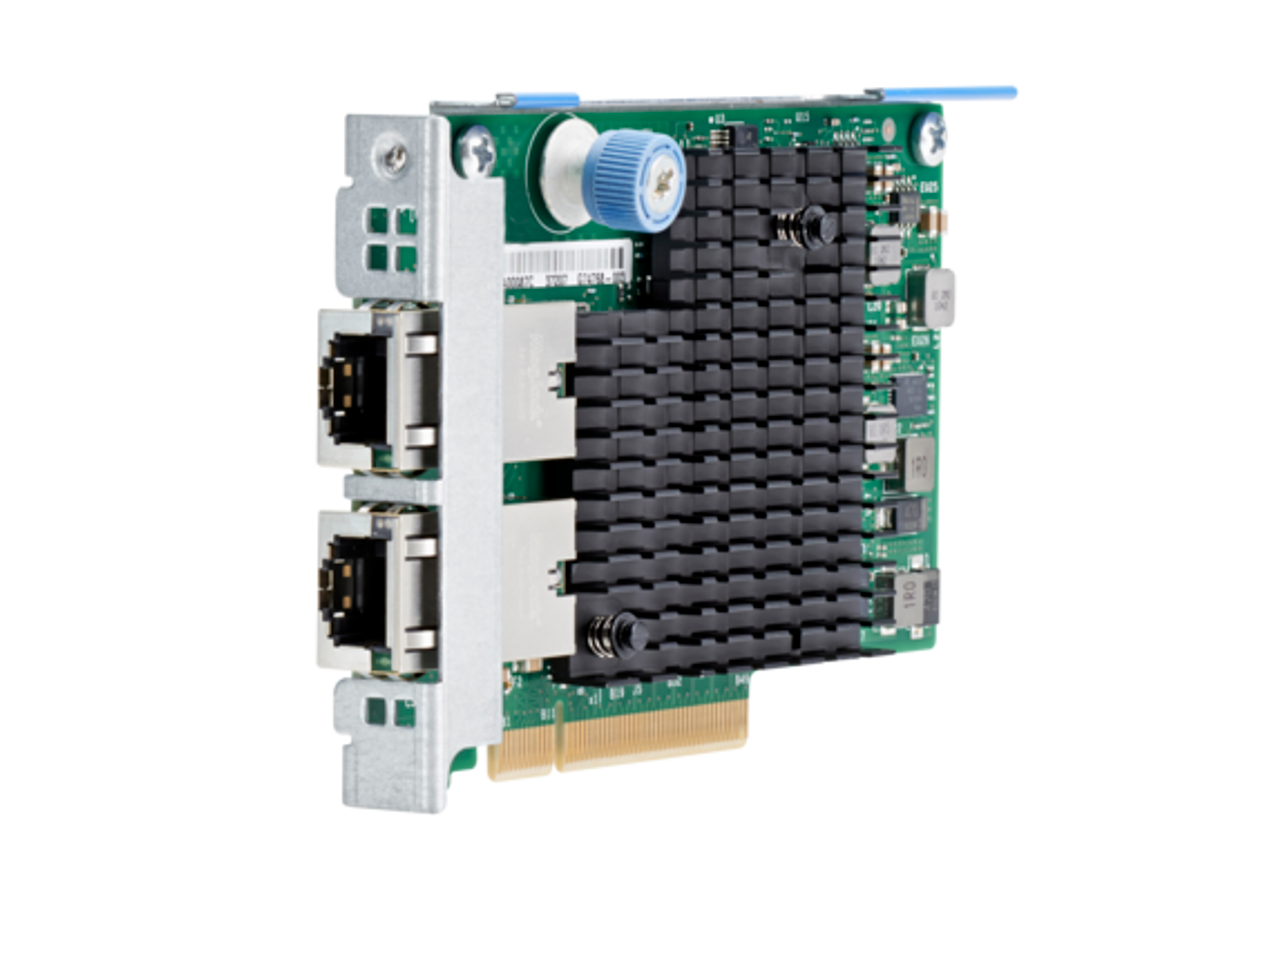 HPE 701525-001 10GbE Dual-Port 561FLR-T Adapter for G8 G9 Servers